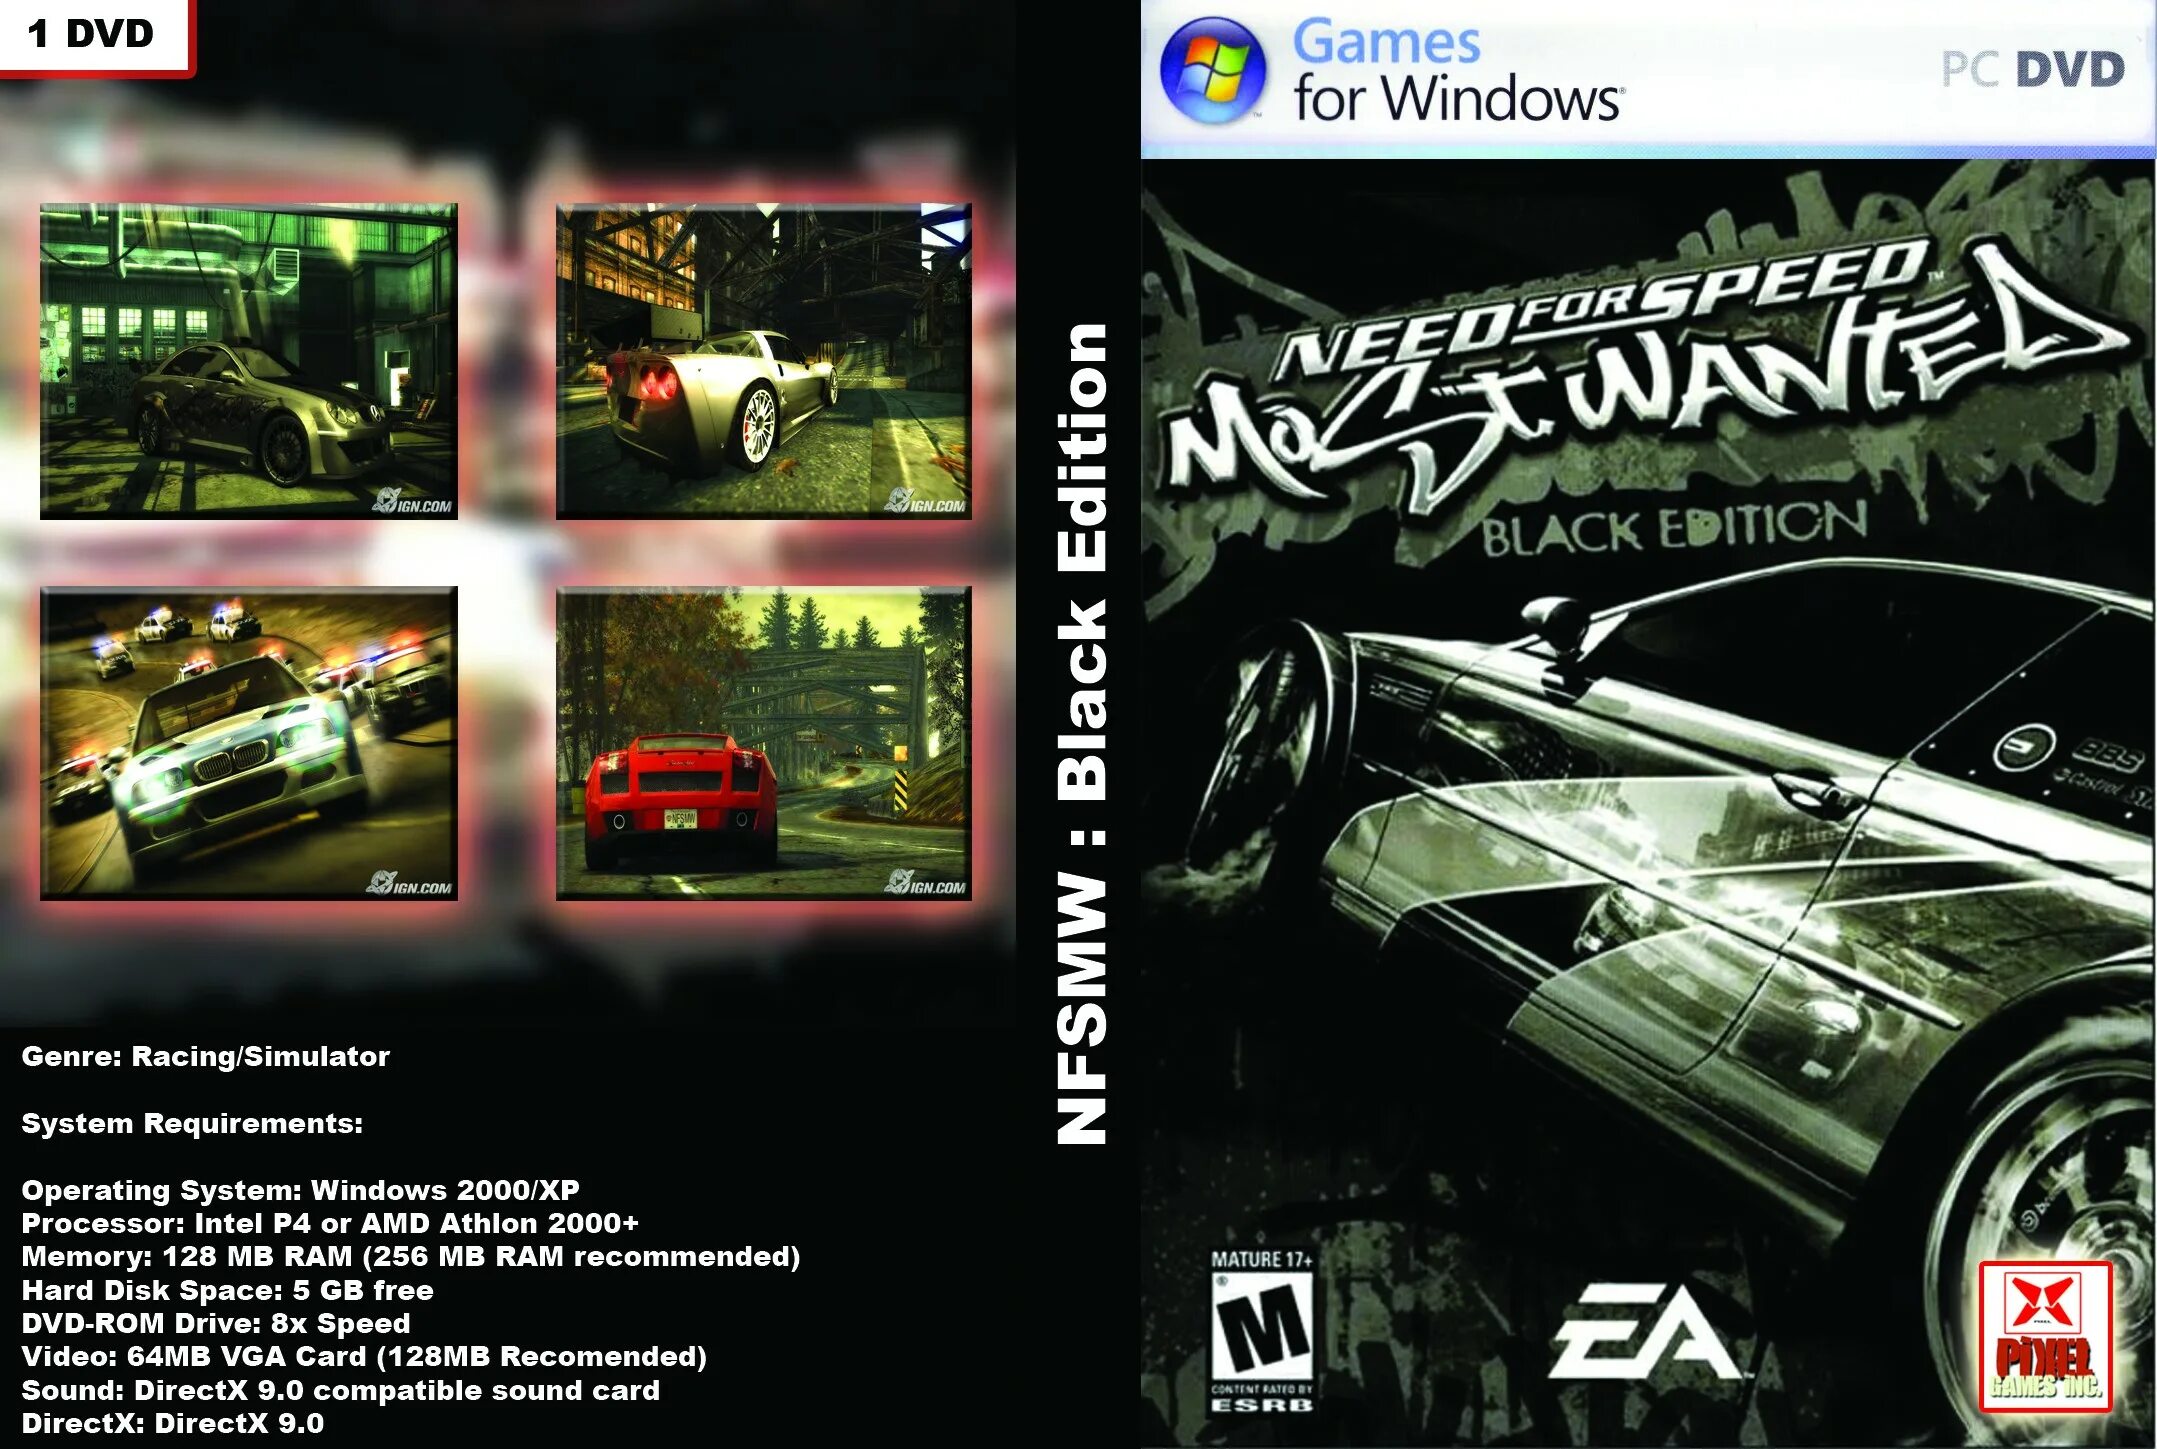 NFS most wanted 2005 диск. NFS most wanted 2005 Black Edition. Нфс 2005 обложка. Диск PC NFS 2005. На компьютер most wanted